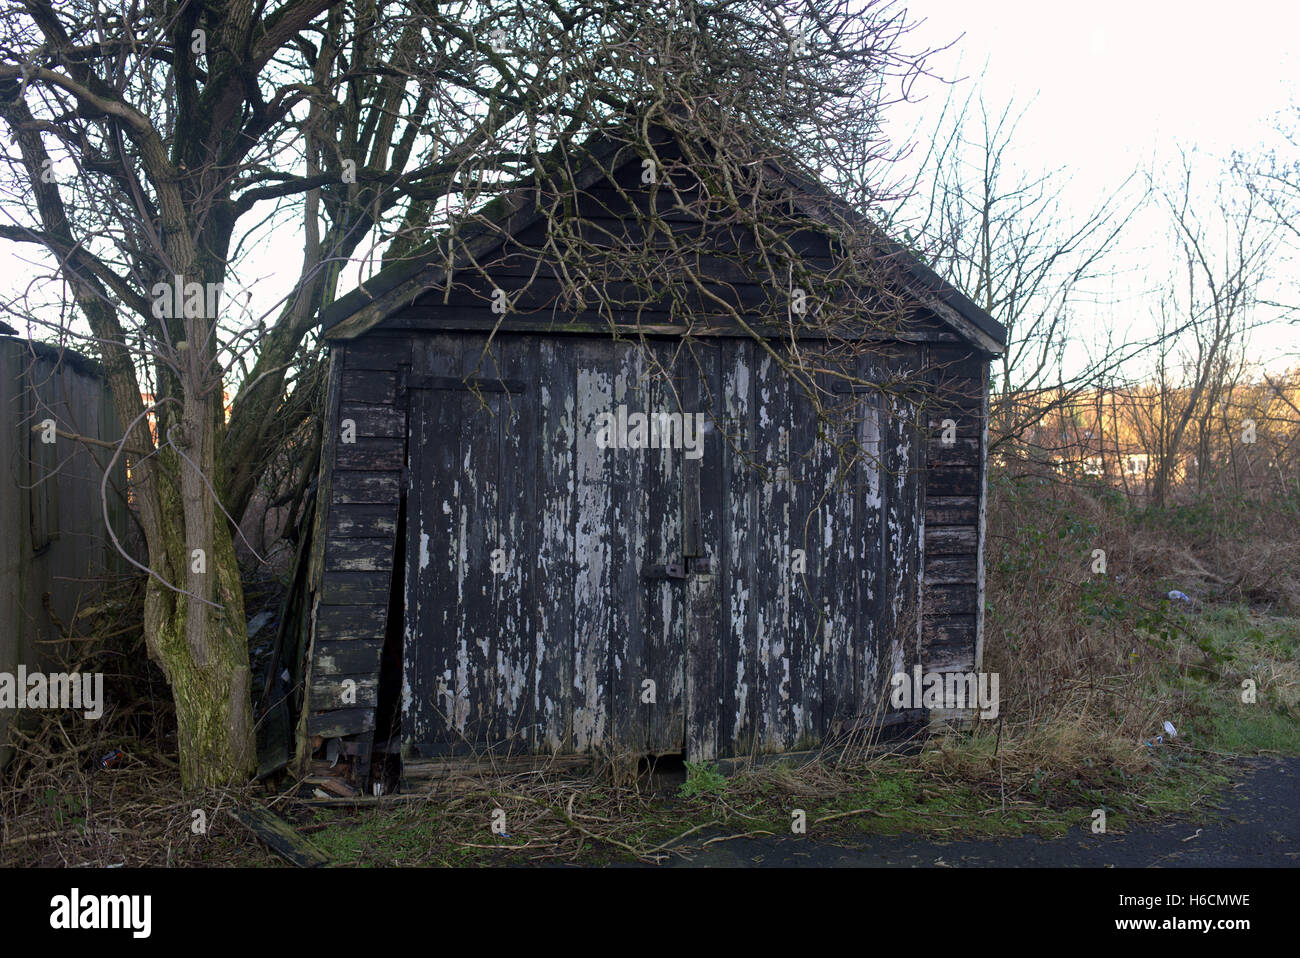 Dilapidated run down sheds still in use Stock Photo